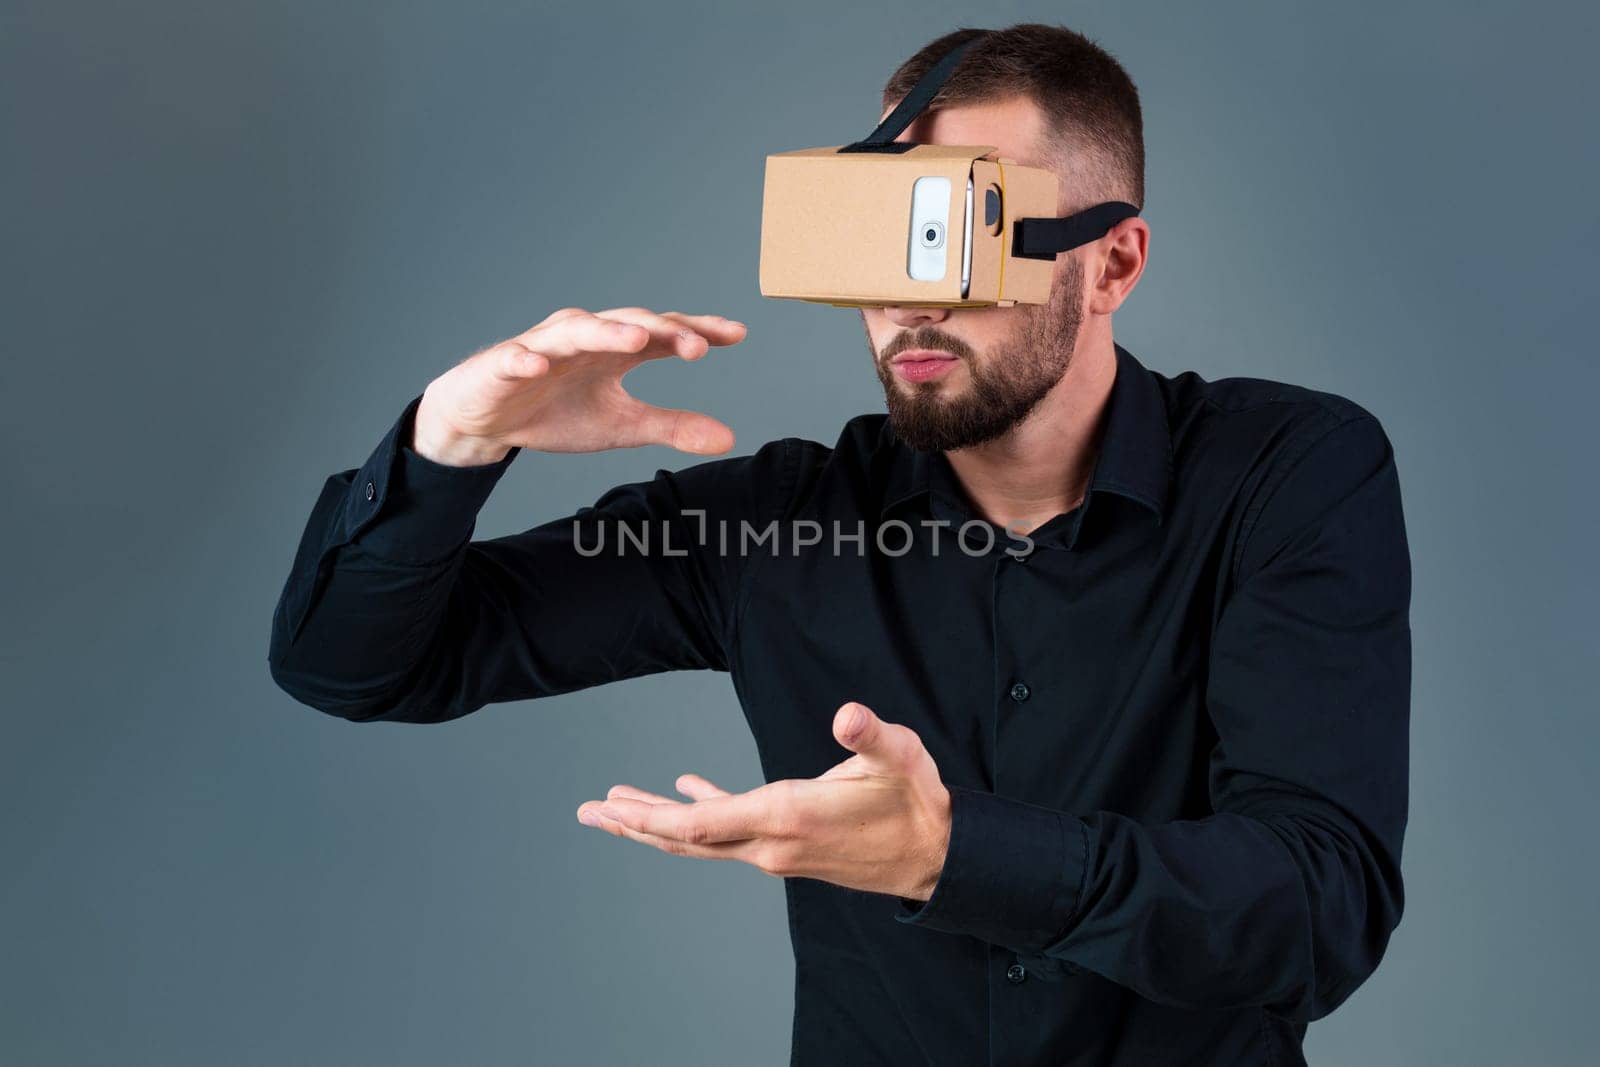 Man using a new virtual reality headset on grey background. Men's emotions